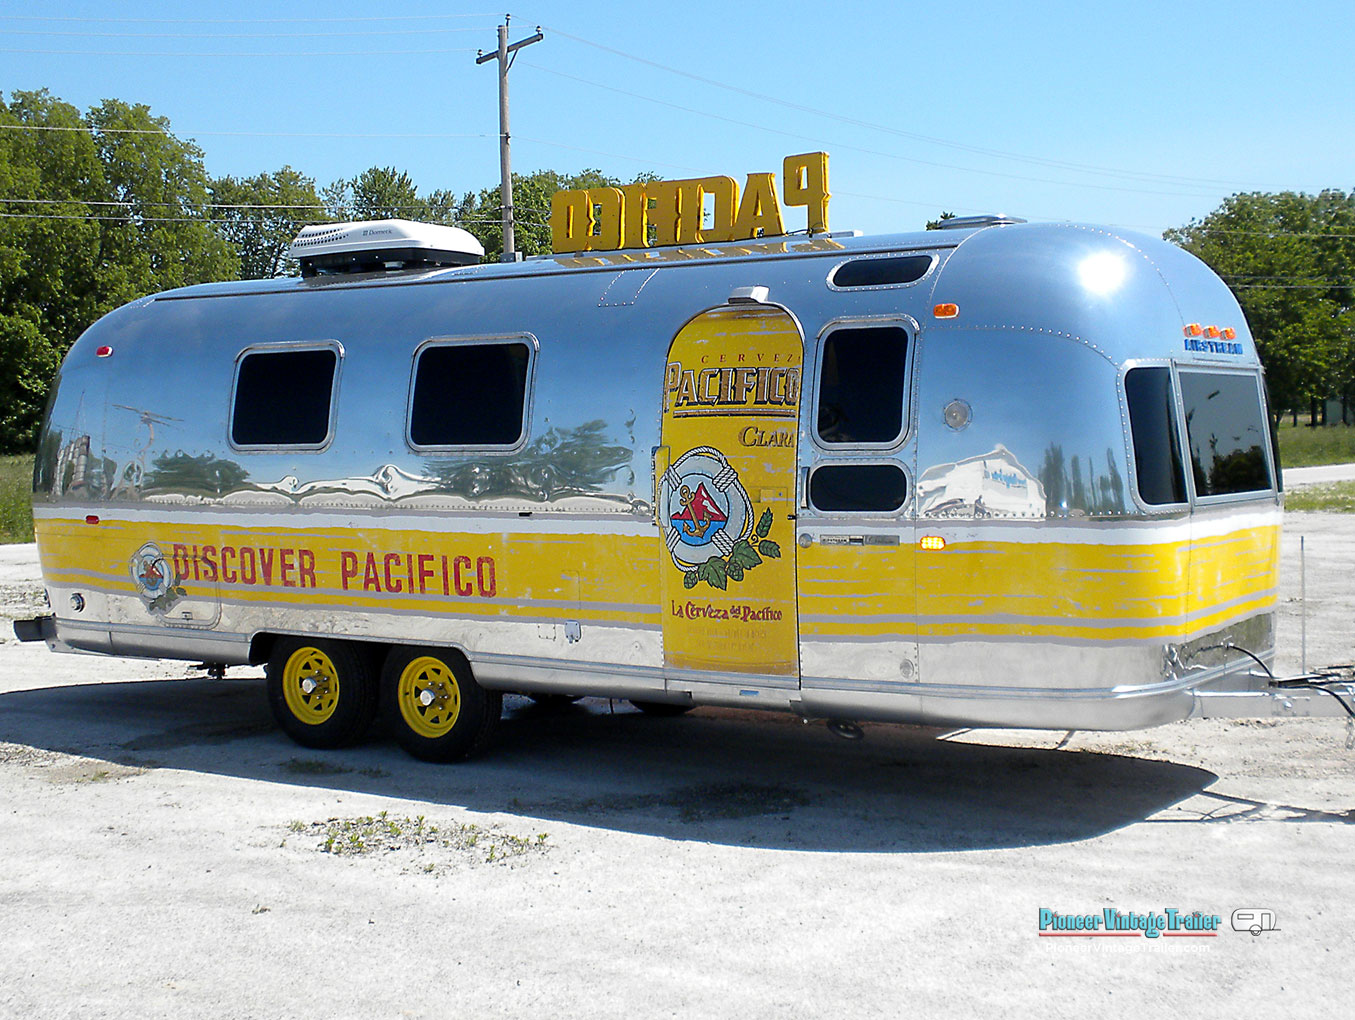 Pacifico Airstream vending trailer - side view